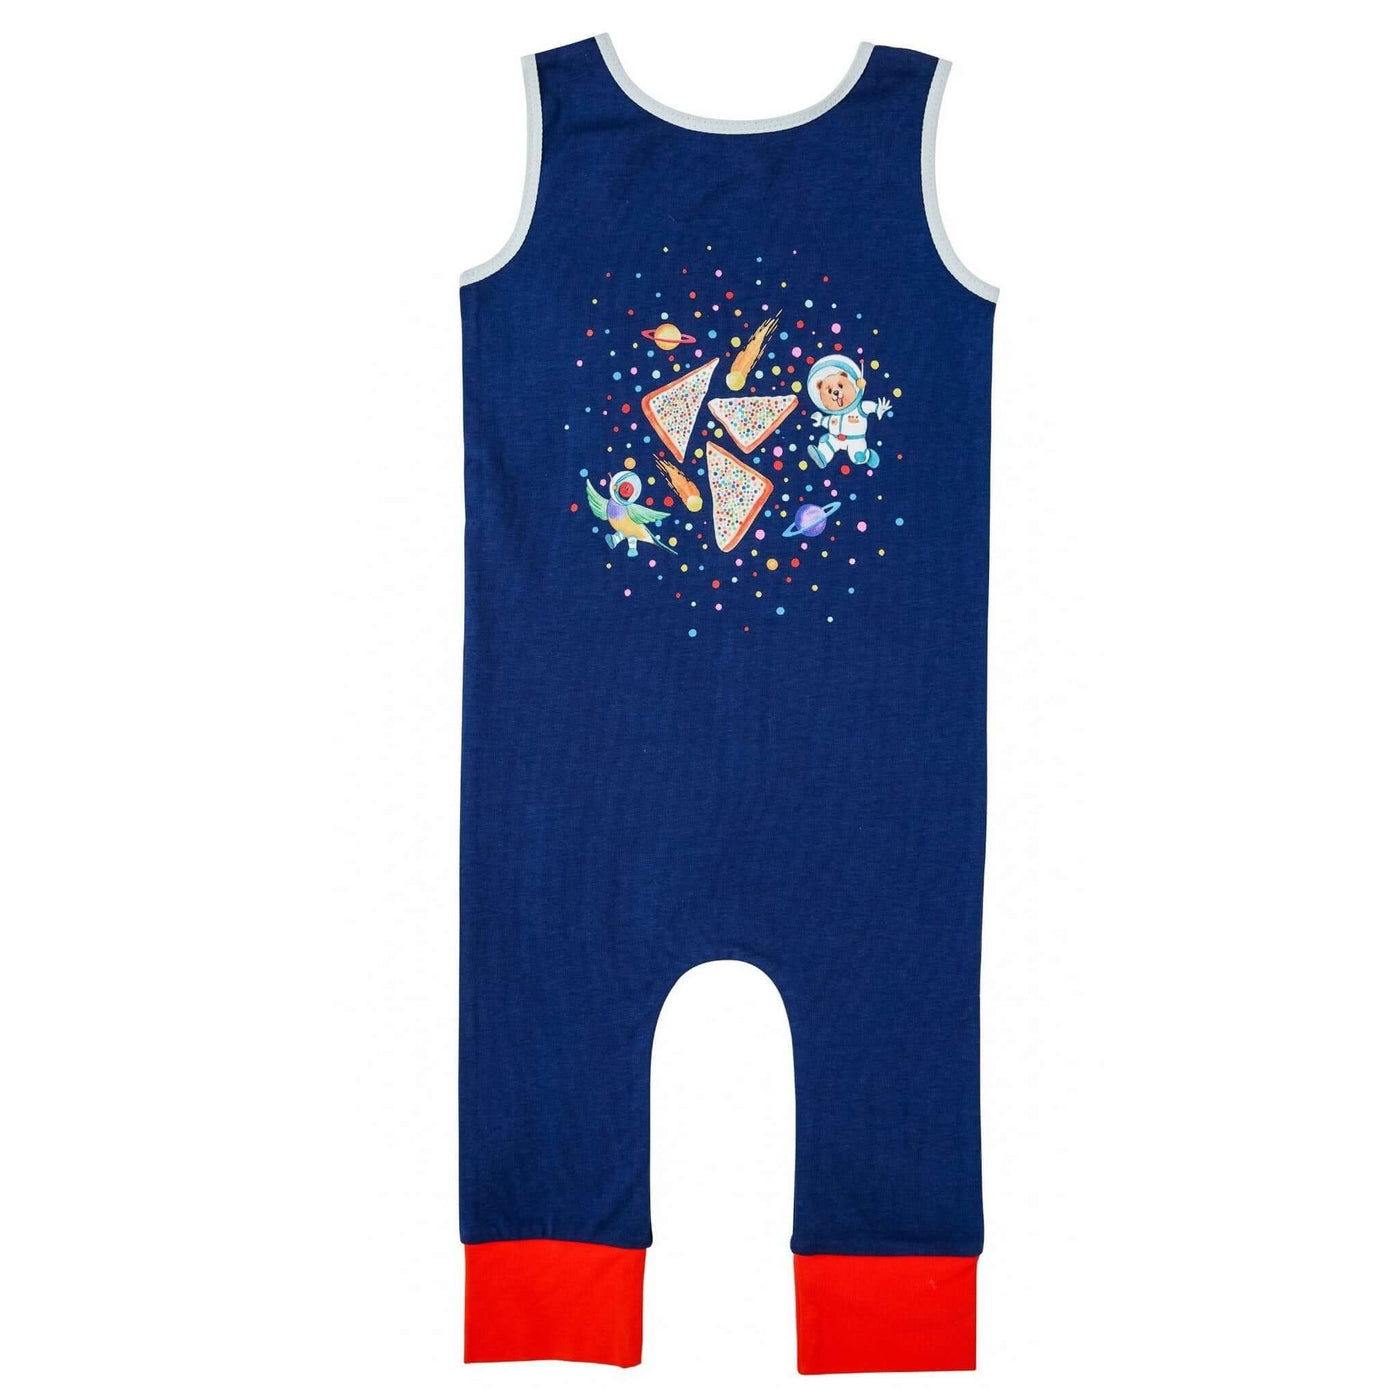 Romperoo Organic Romper - Goldie and Quentin Astronaut